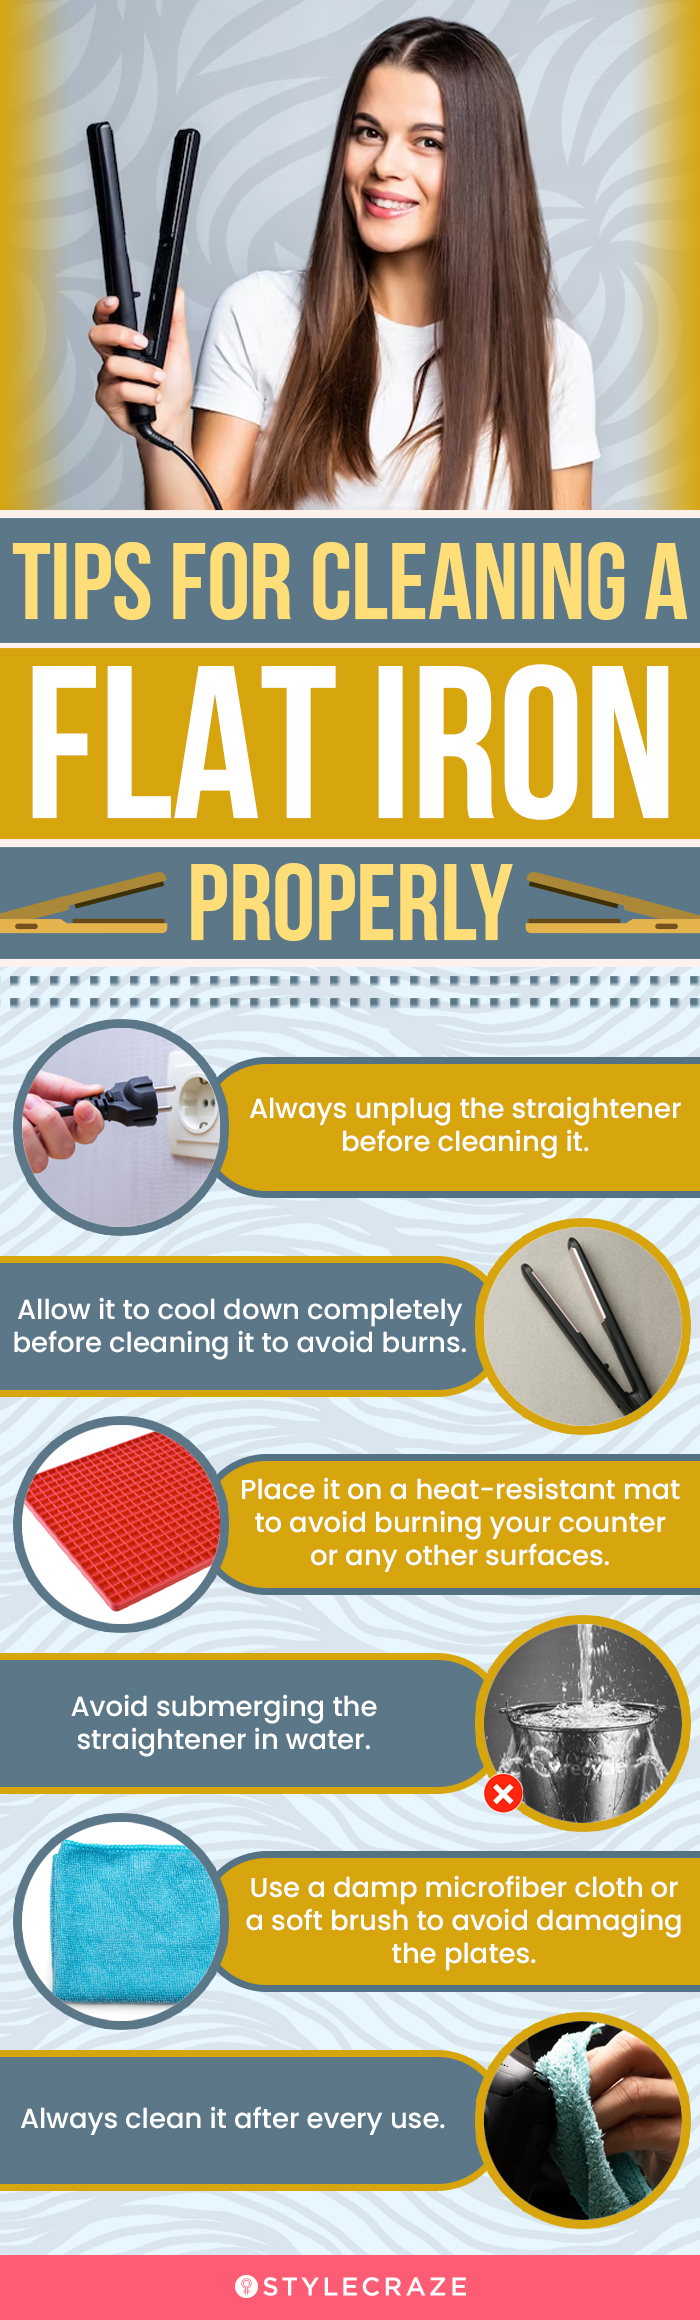 tips for cleaning a flat iron properly (infographic)